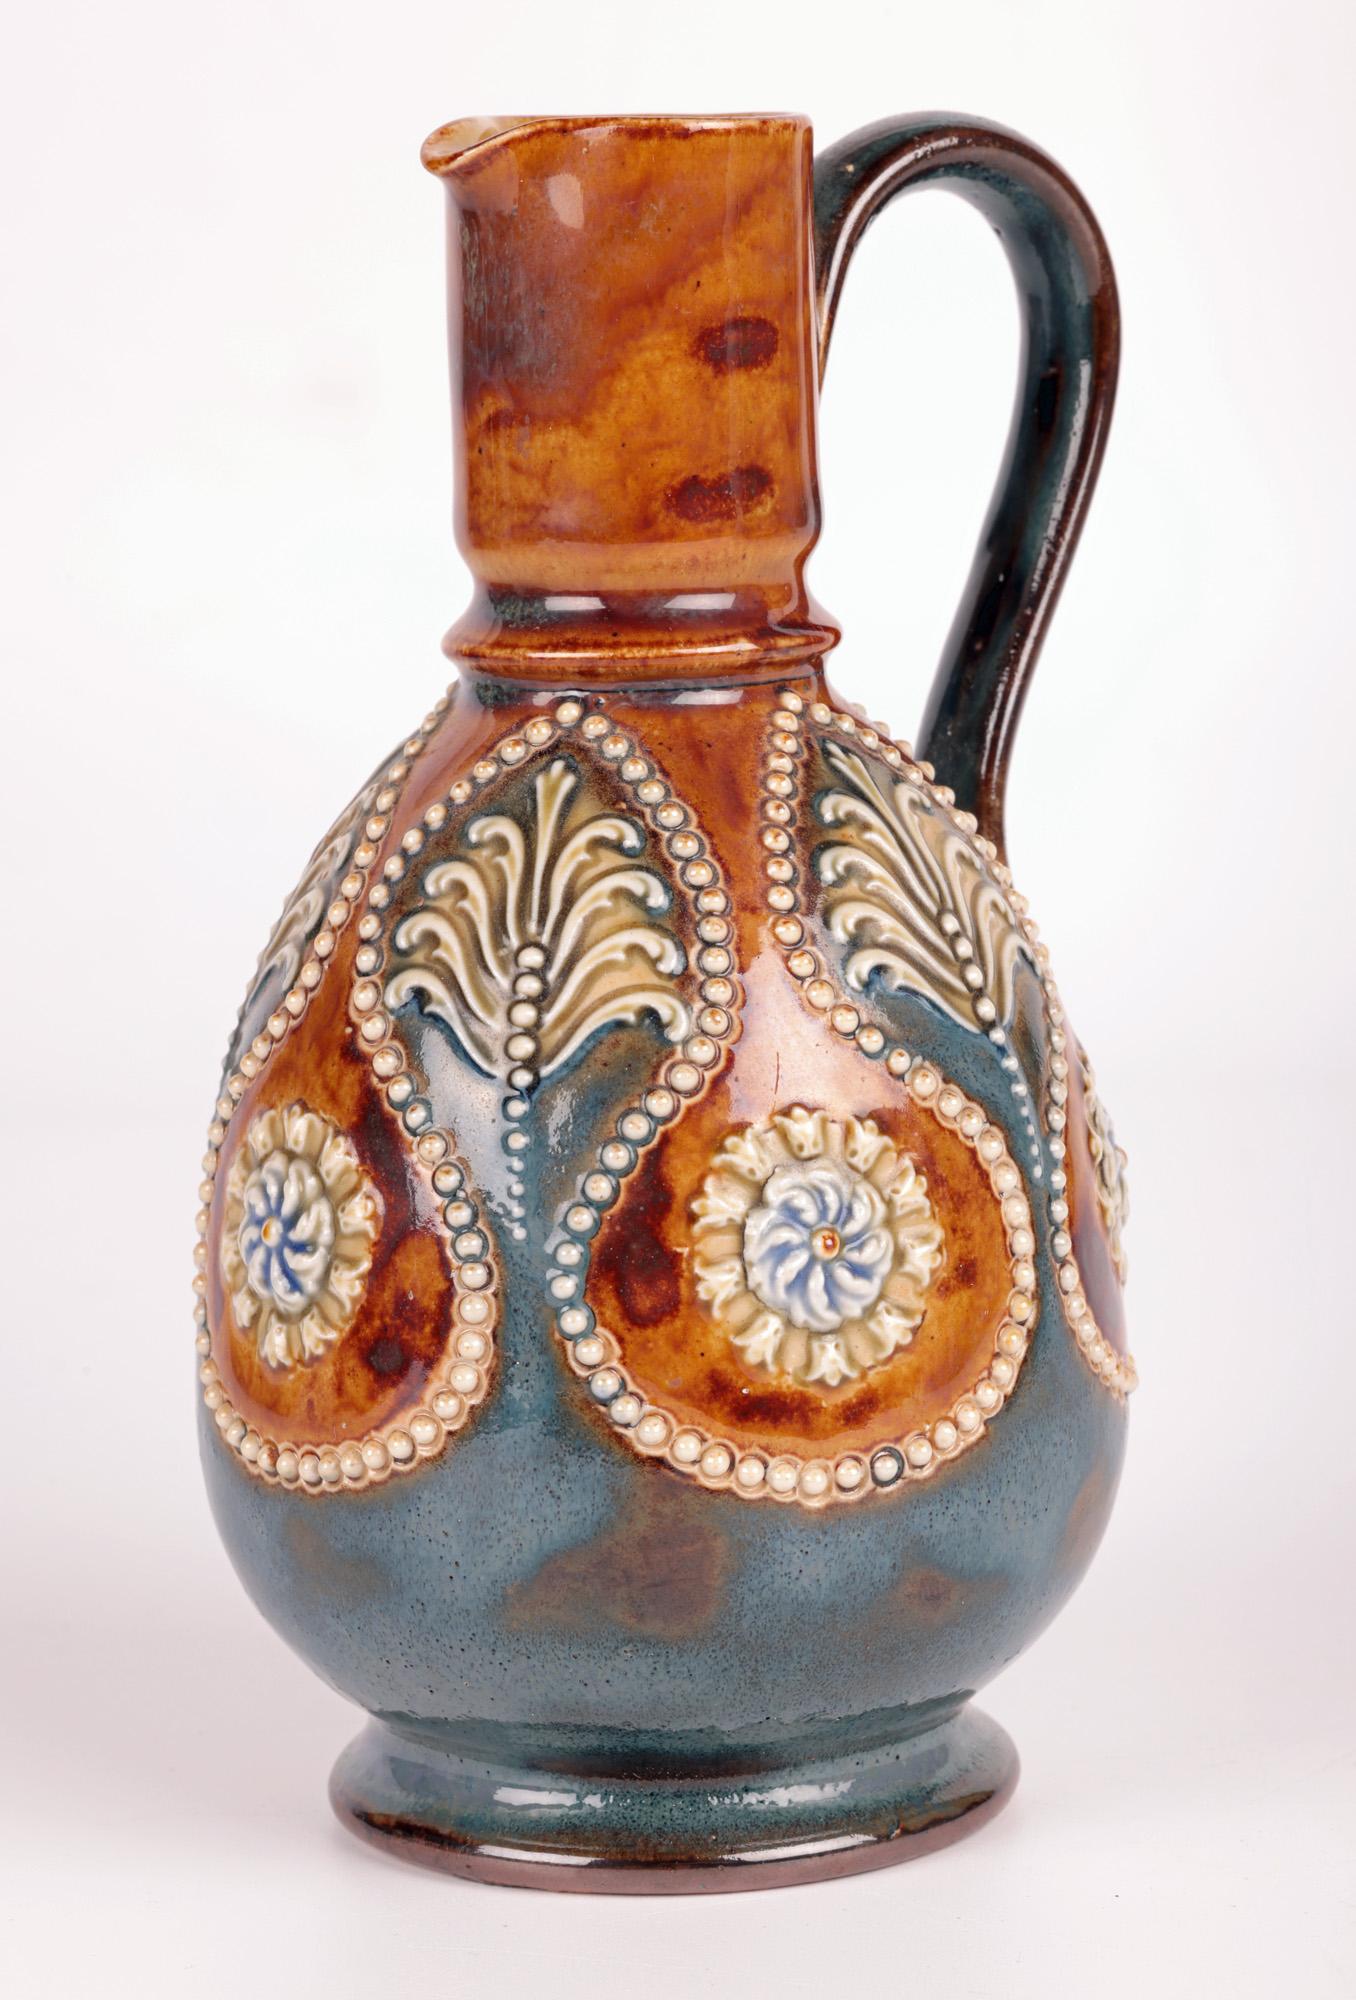 Doulton Lambeth Art Nouveau Beaded Floral Jug by Annie Partridge  In Good Condition For Sale In Bishop's Stortford, Hertfordshire